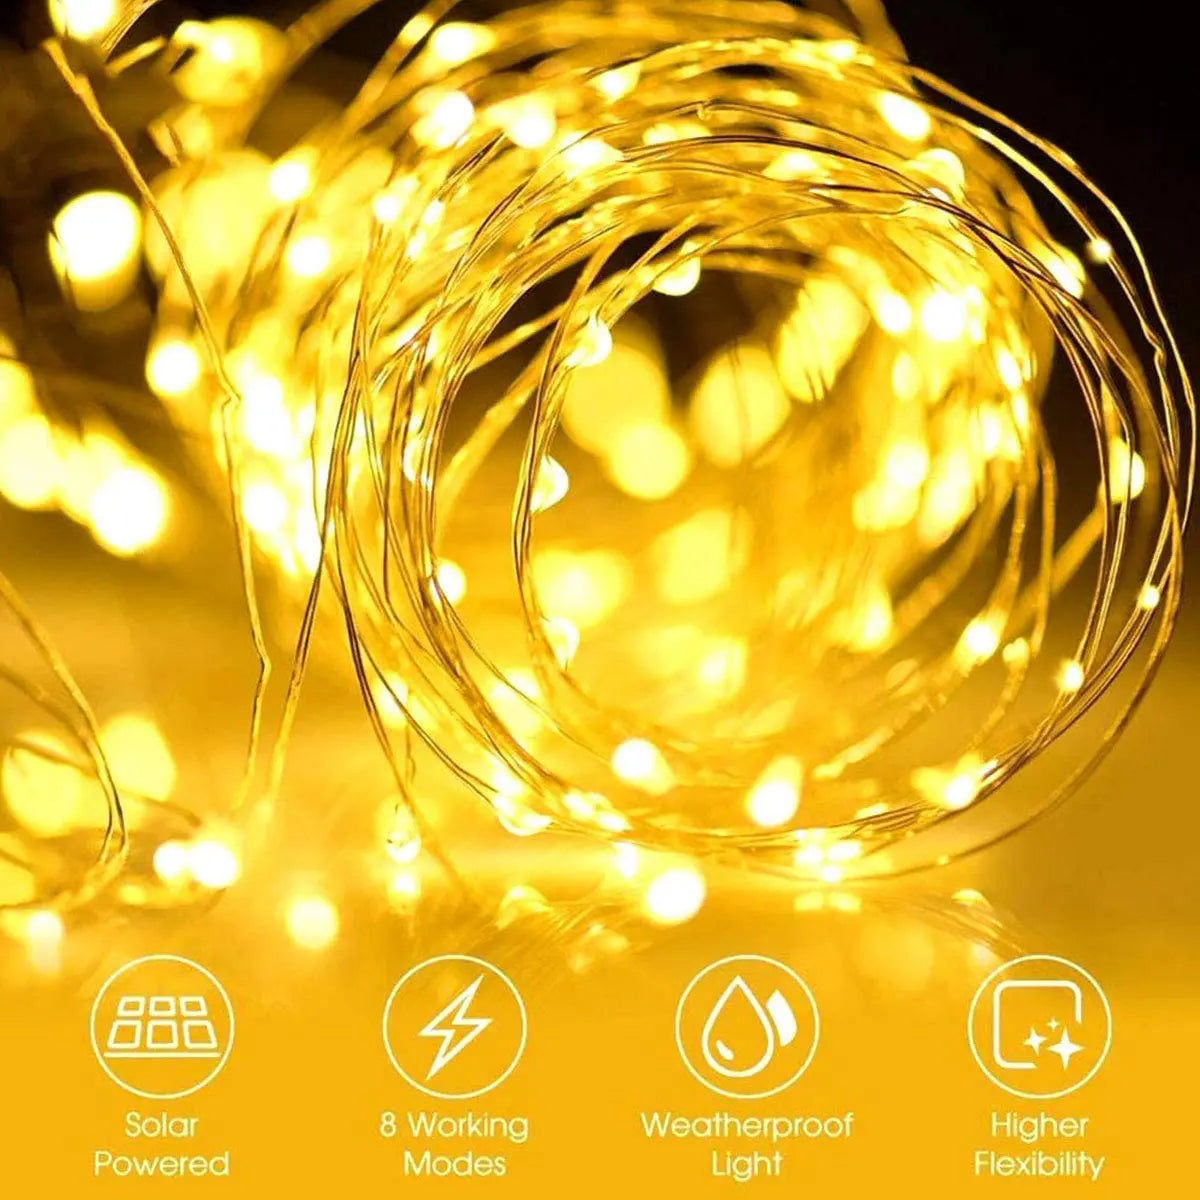 LED Solar Fairy Light, Works in various weather conditions; features higher powered modes and flexible design.